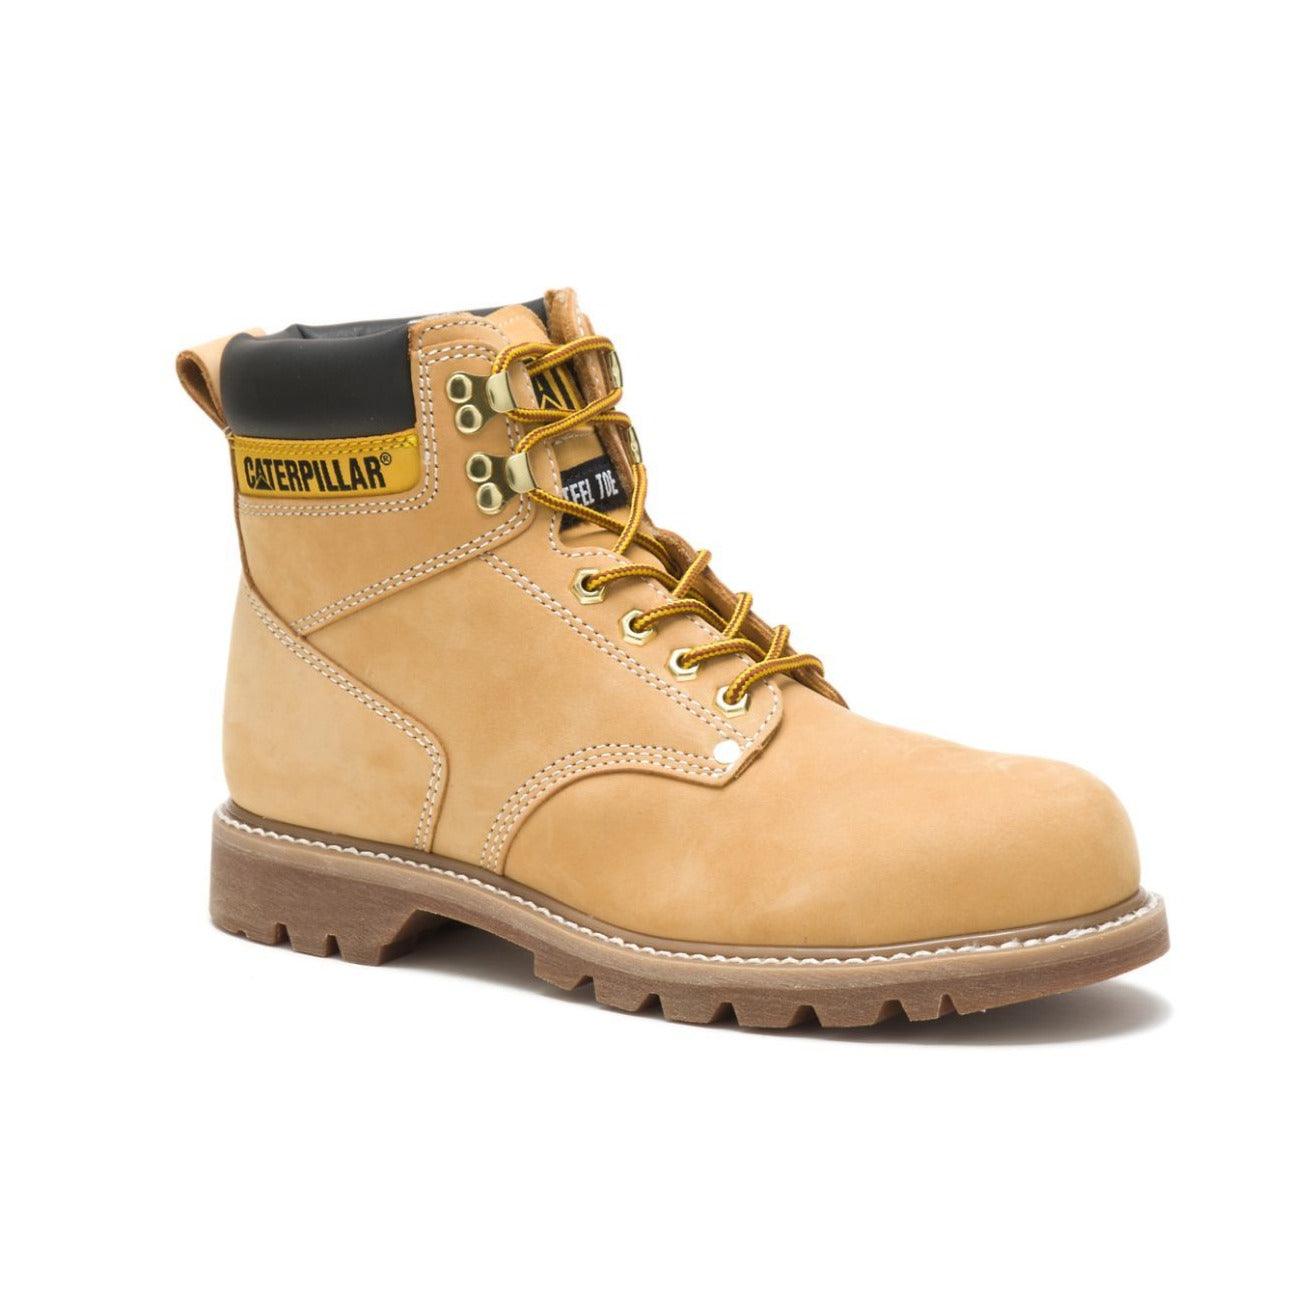 Men's Second Shift Steel Toe Work Boot - {{ collection.title }} - TIT